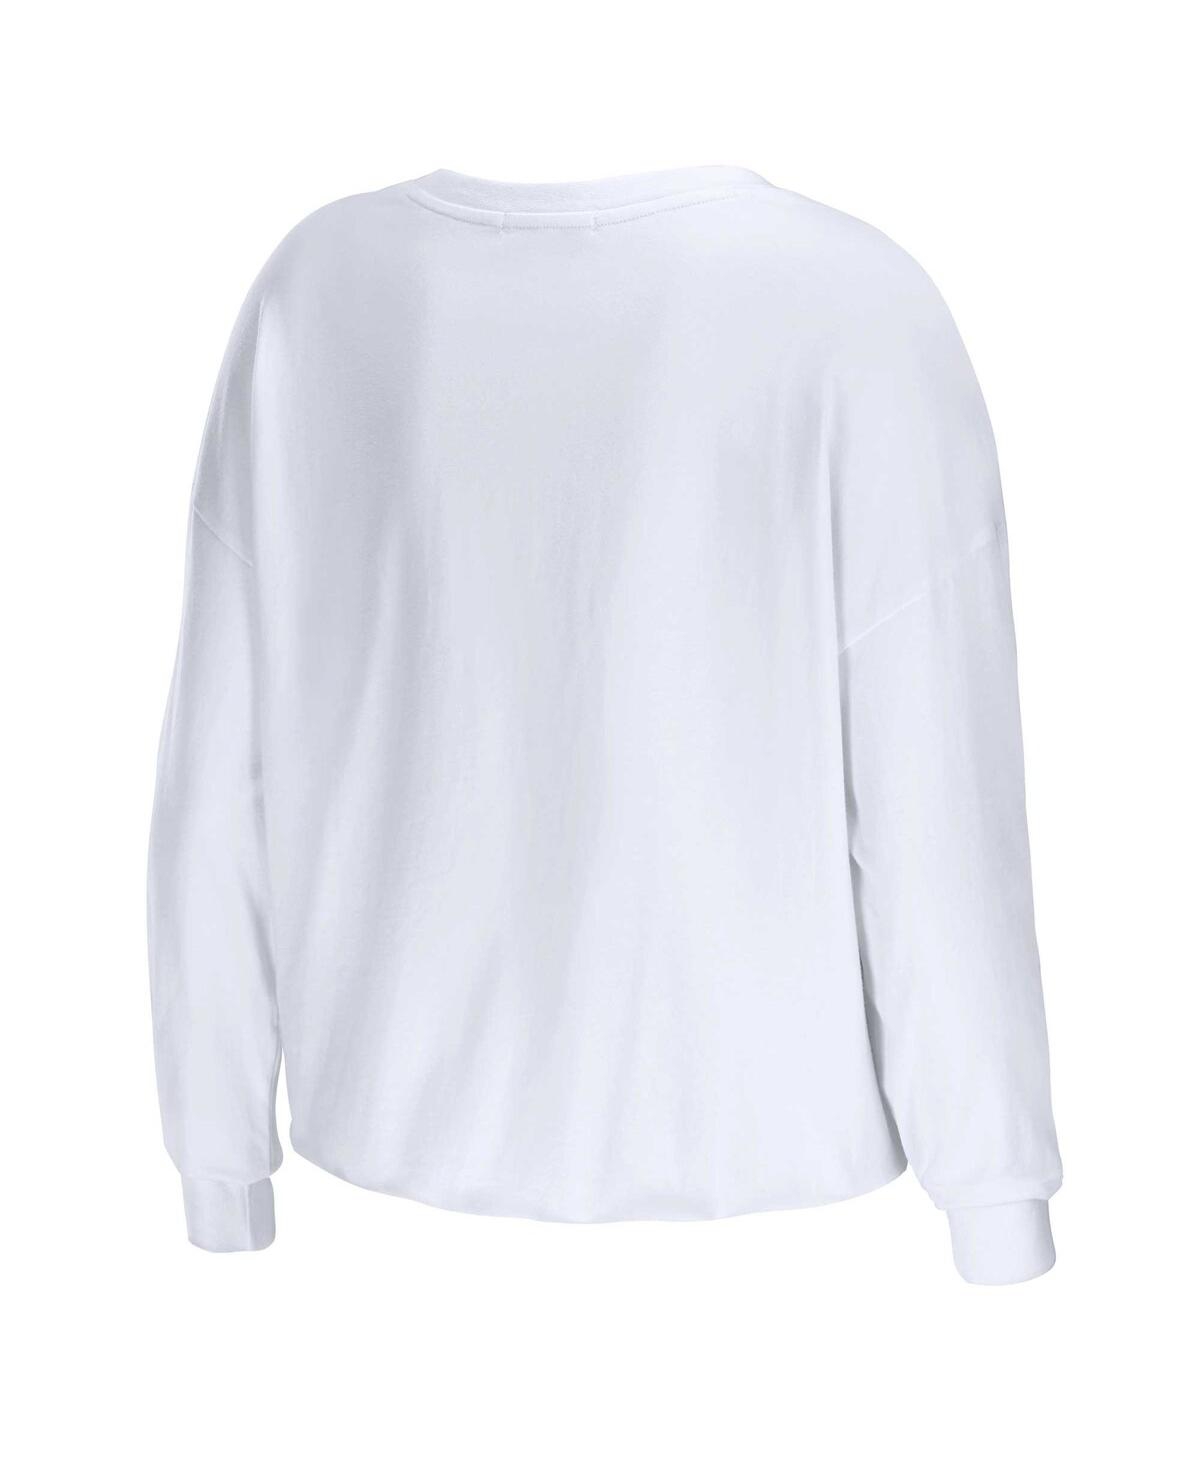 Shop Wear By Erin Andrews Women's  White Arizona Cardinals Domestic Cropped Long Sleeve T-shirt